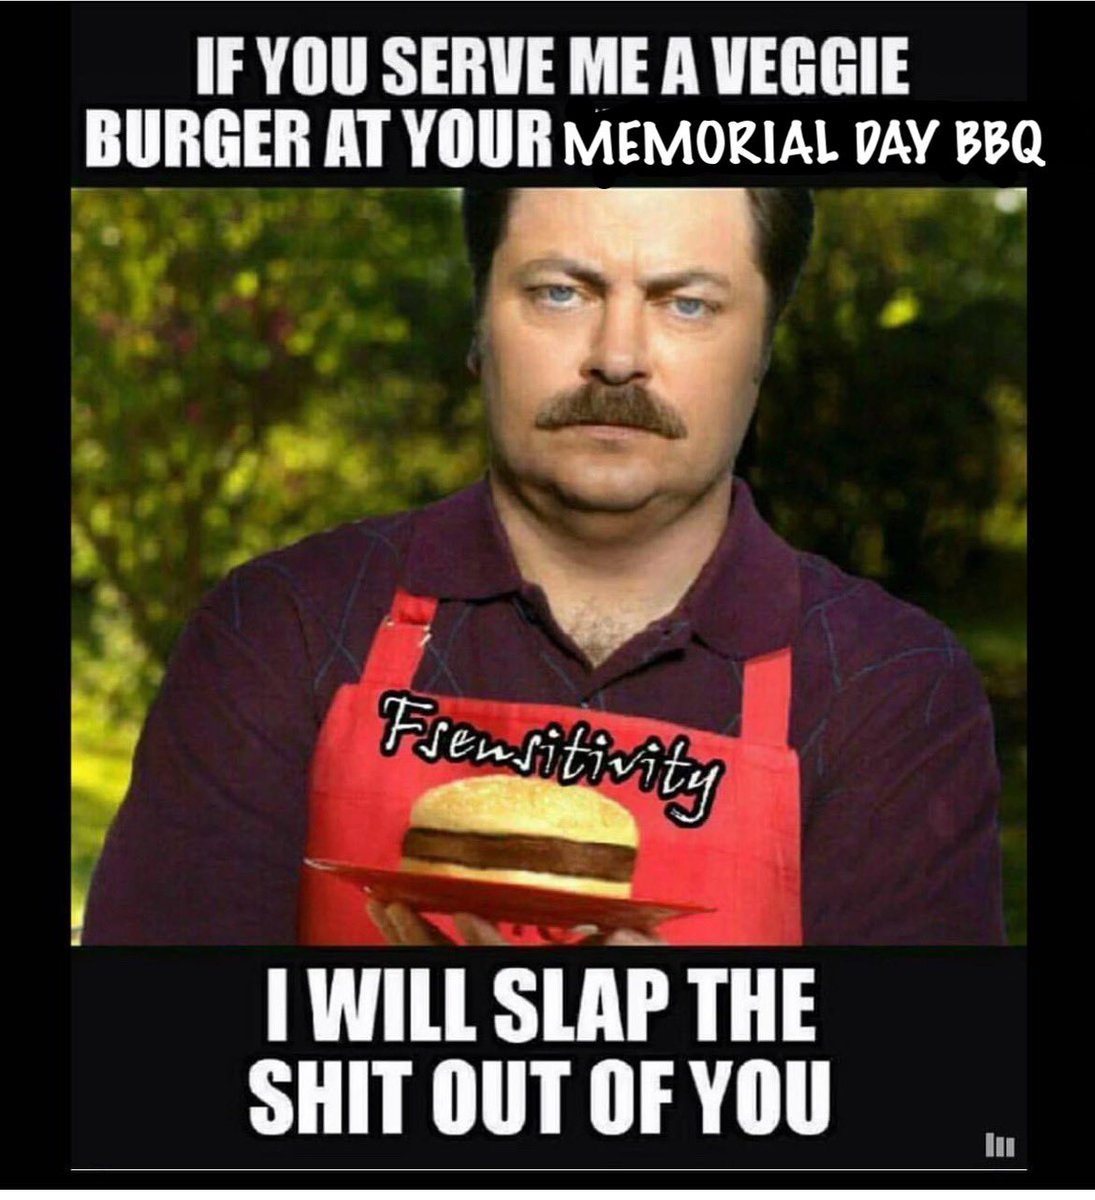 Haha, just don’t do that.🇺🇸😂 Memorial Day BBQ humor.